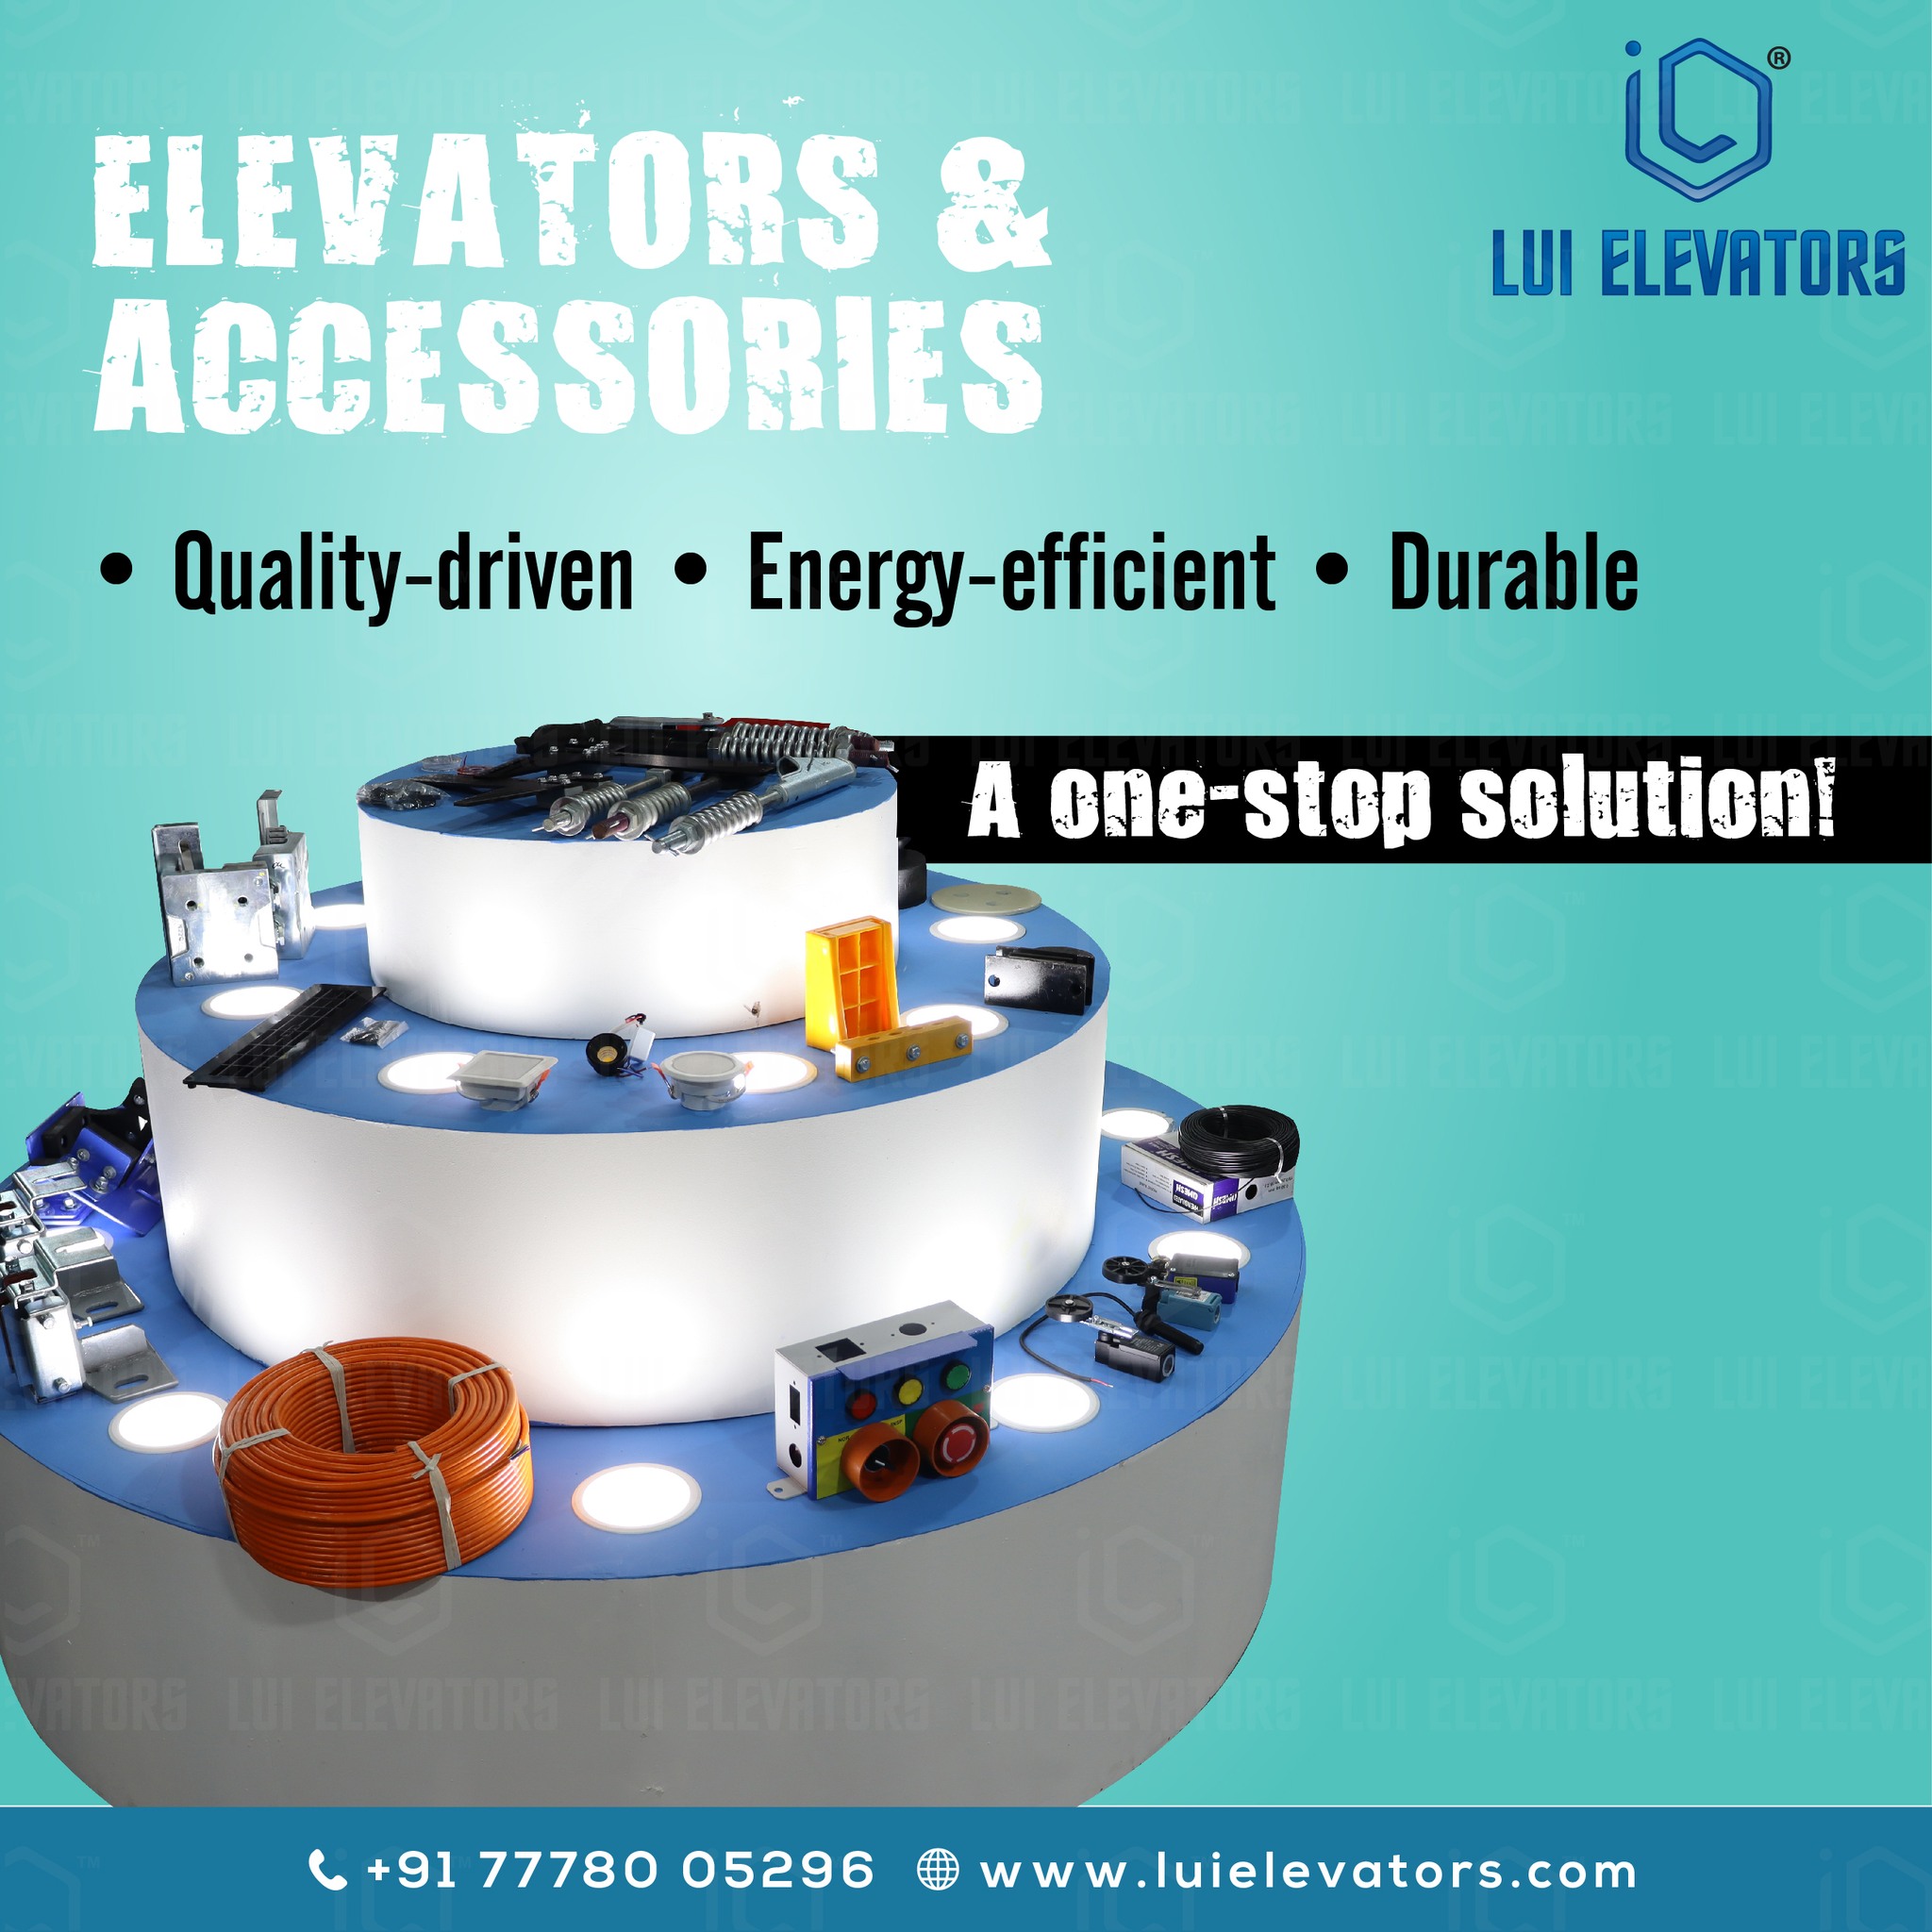 5 top reasons to choose the quality lift elevator accessories 